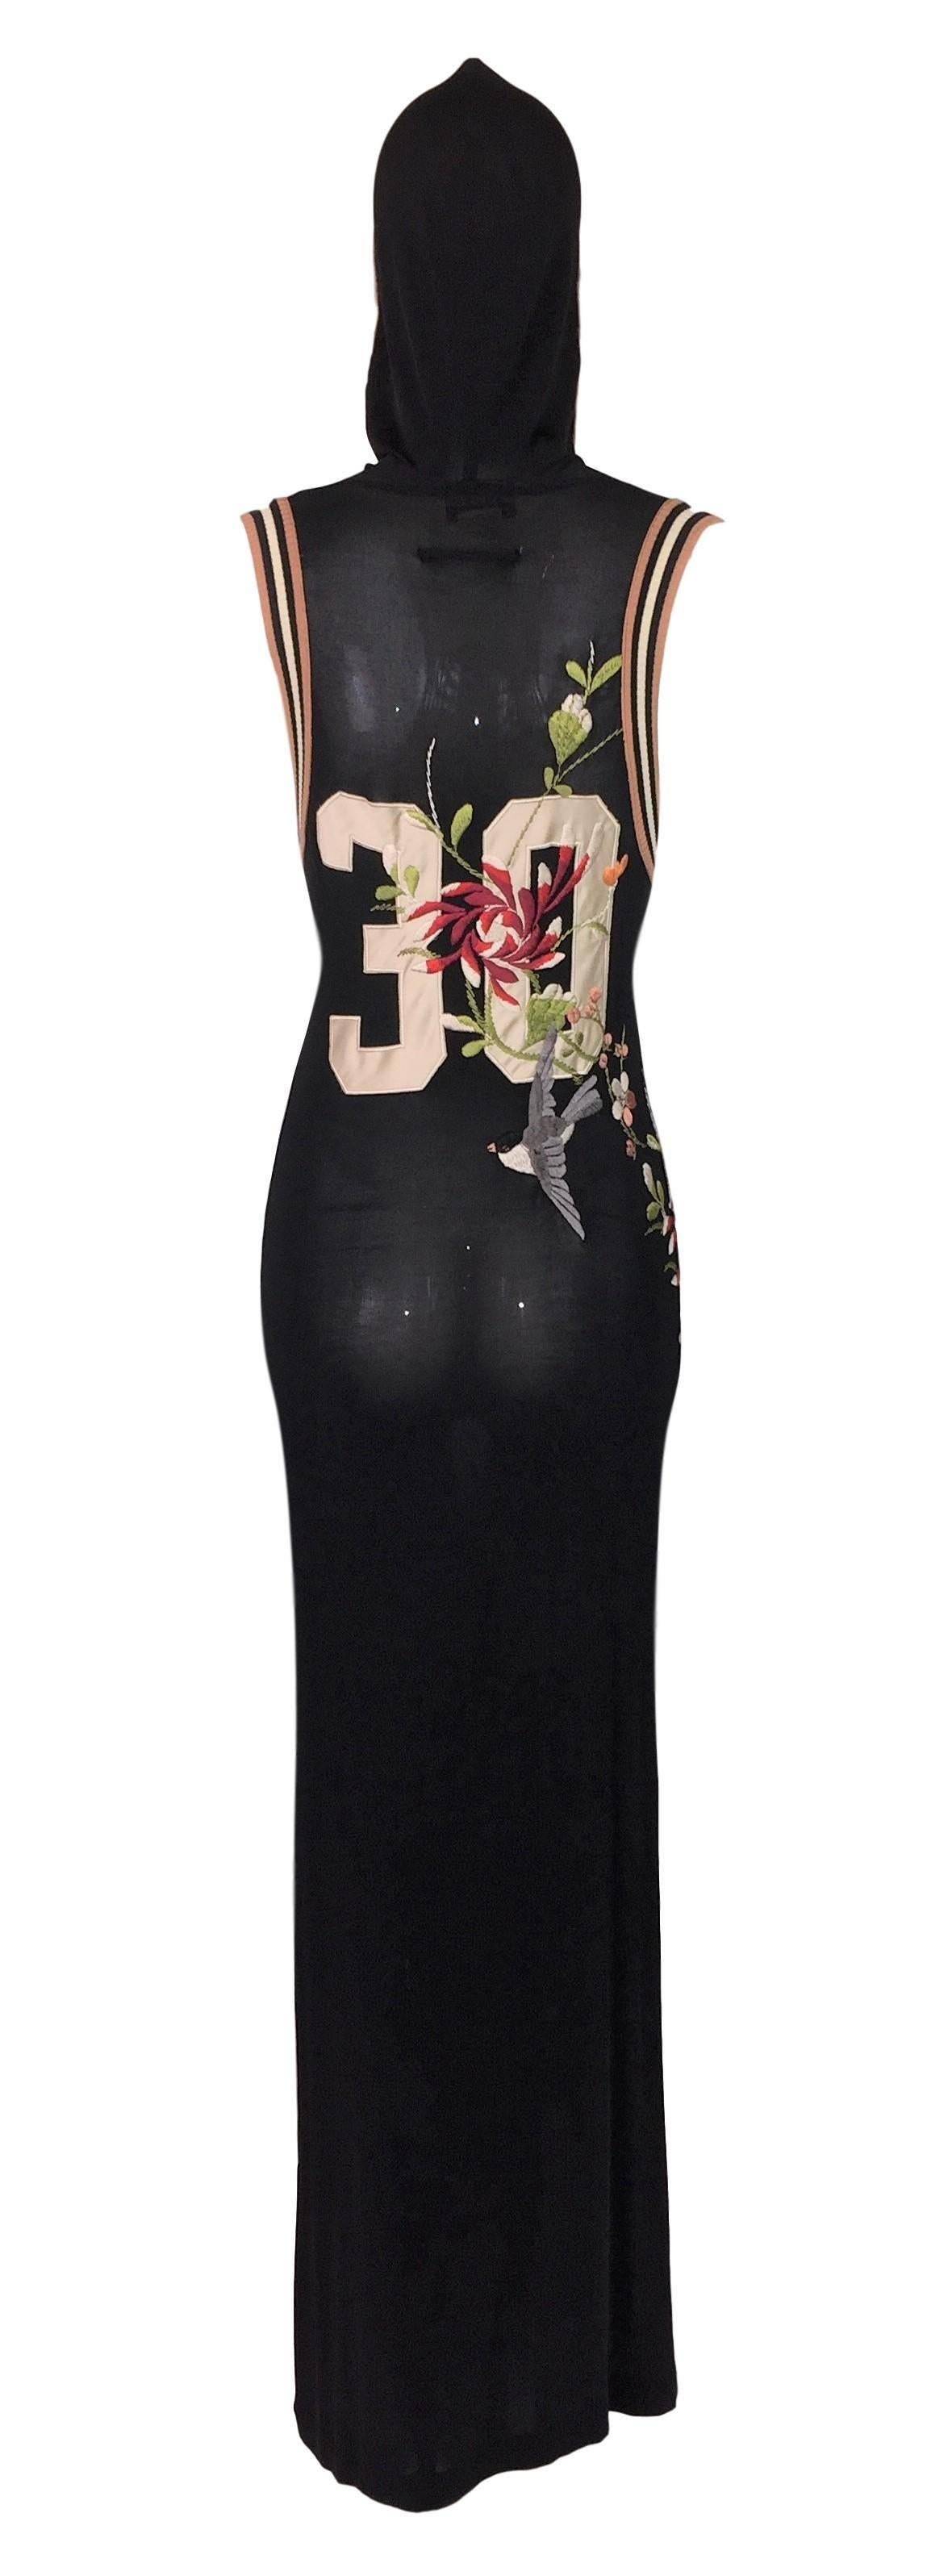 Women's 2000's Jean Paul Gaultier Sheer Black Embroidered Hooded Long Dress Gown